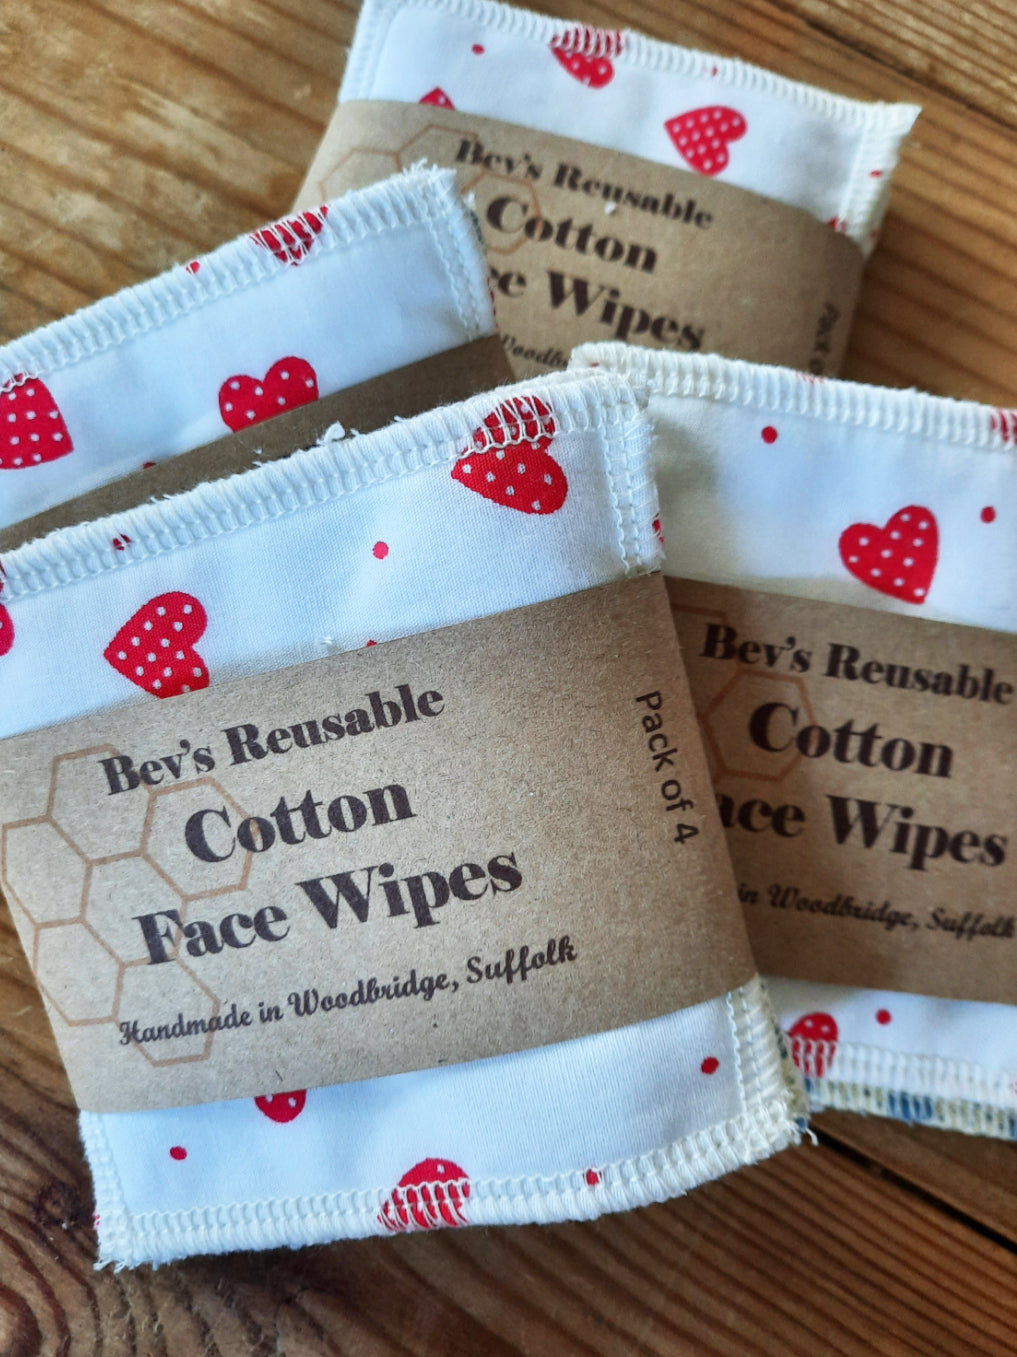 Cotton Face Wipes